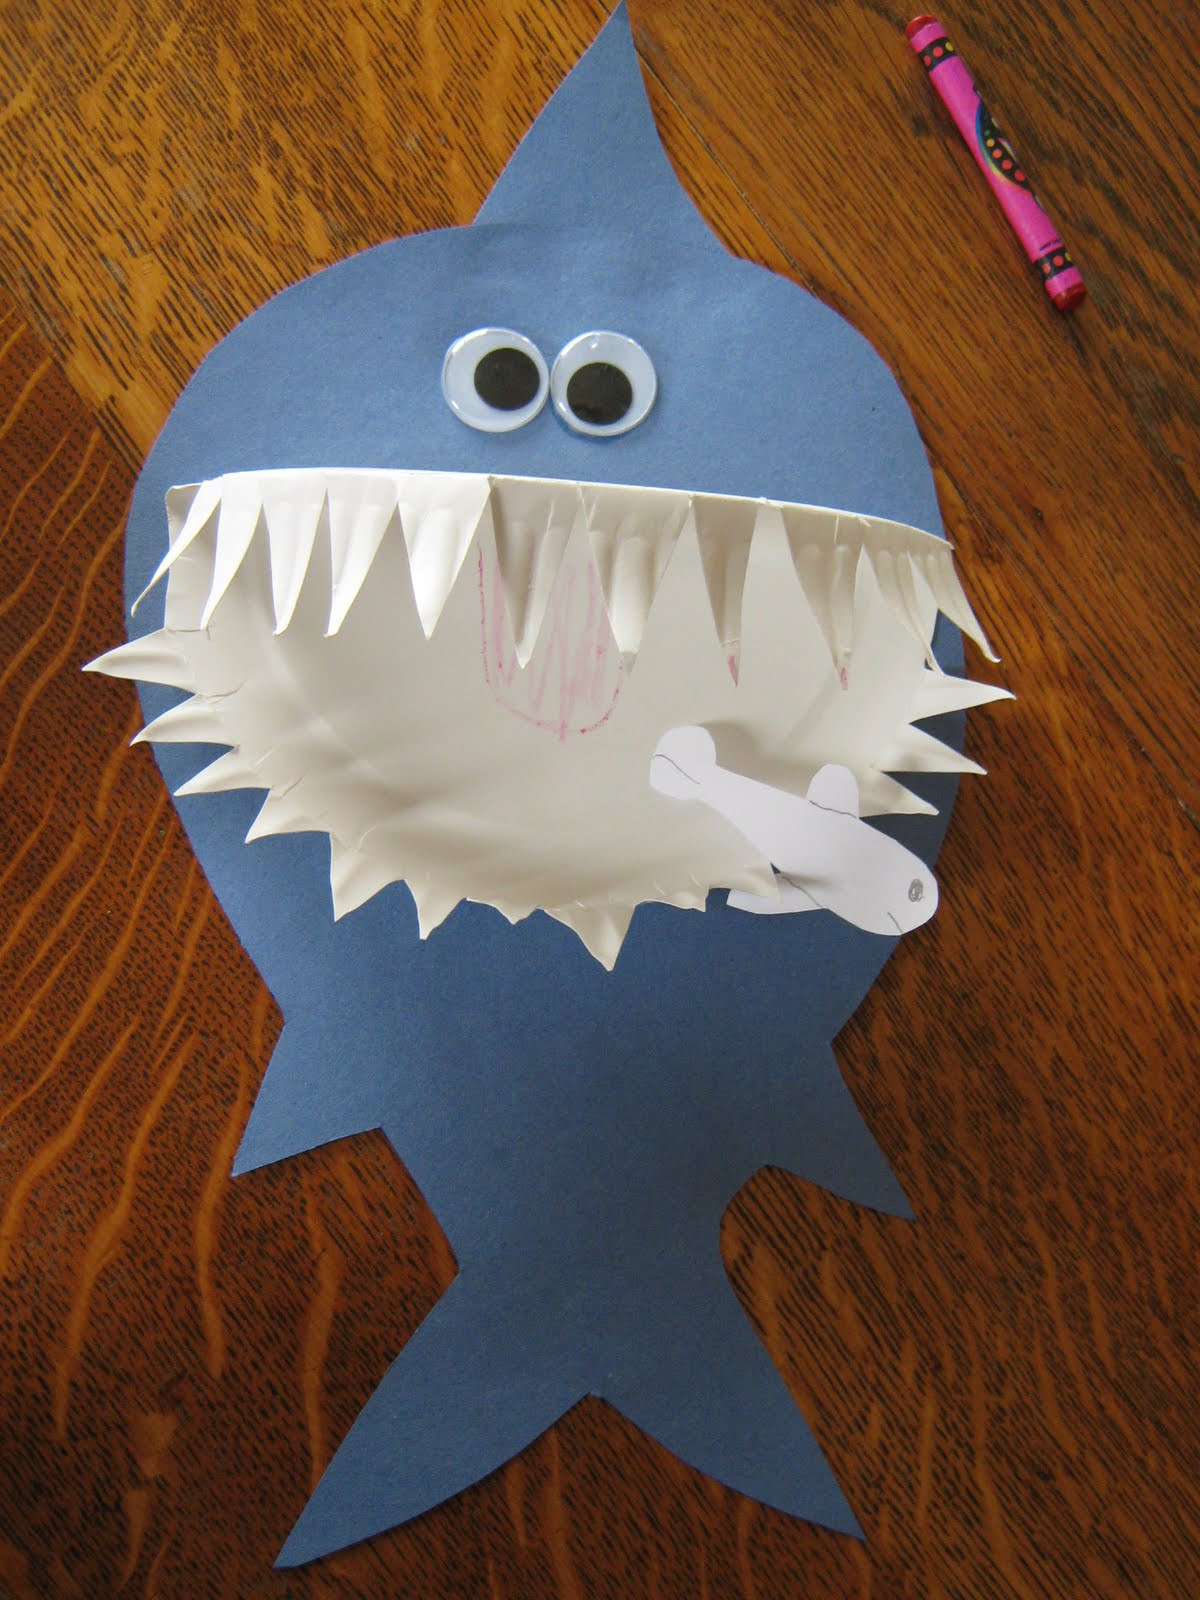 Arts And Craft Ideas For Preschoolers
 Paper Plate Shark